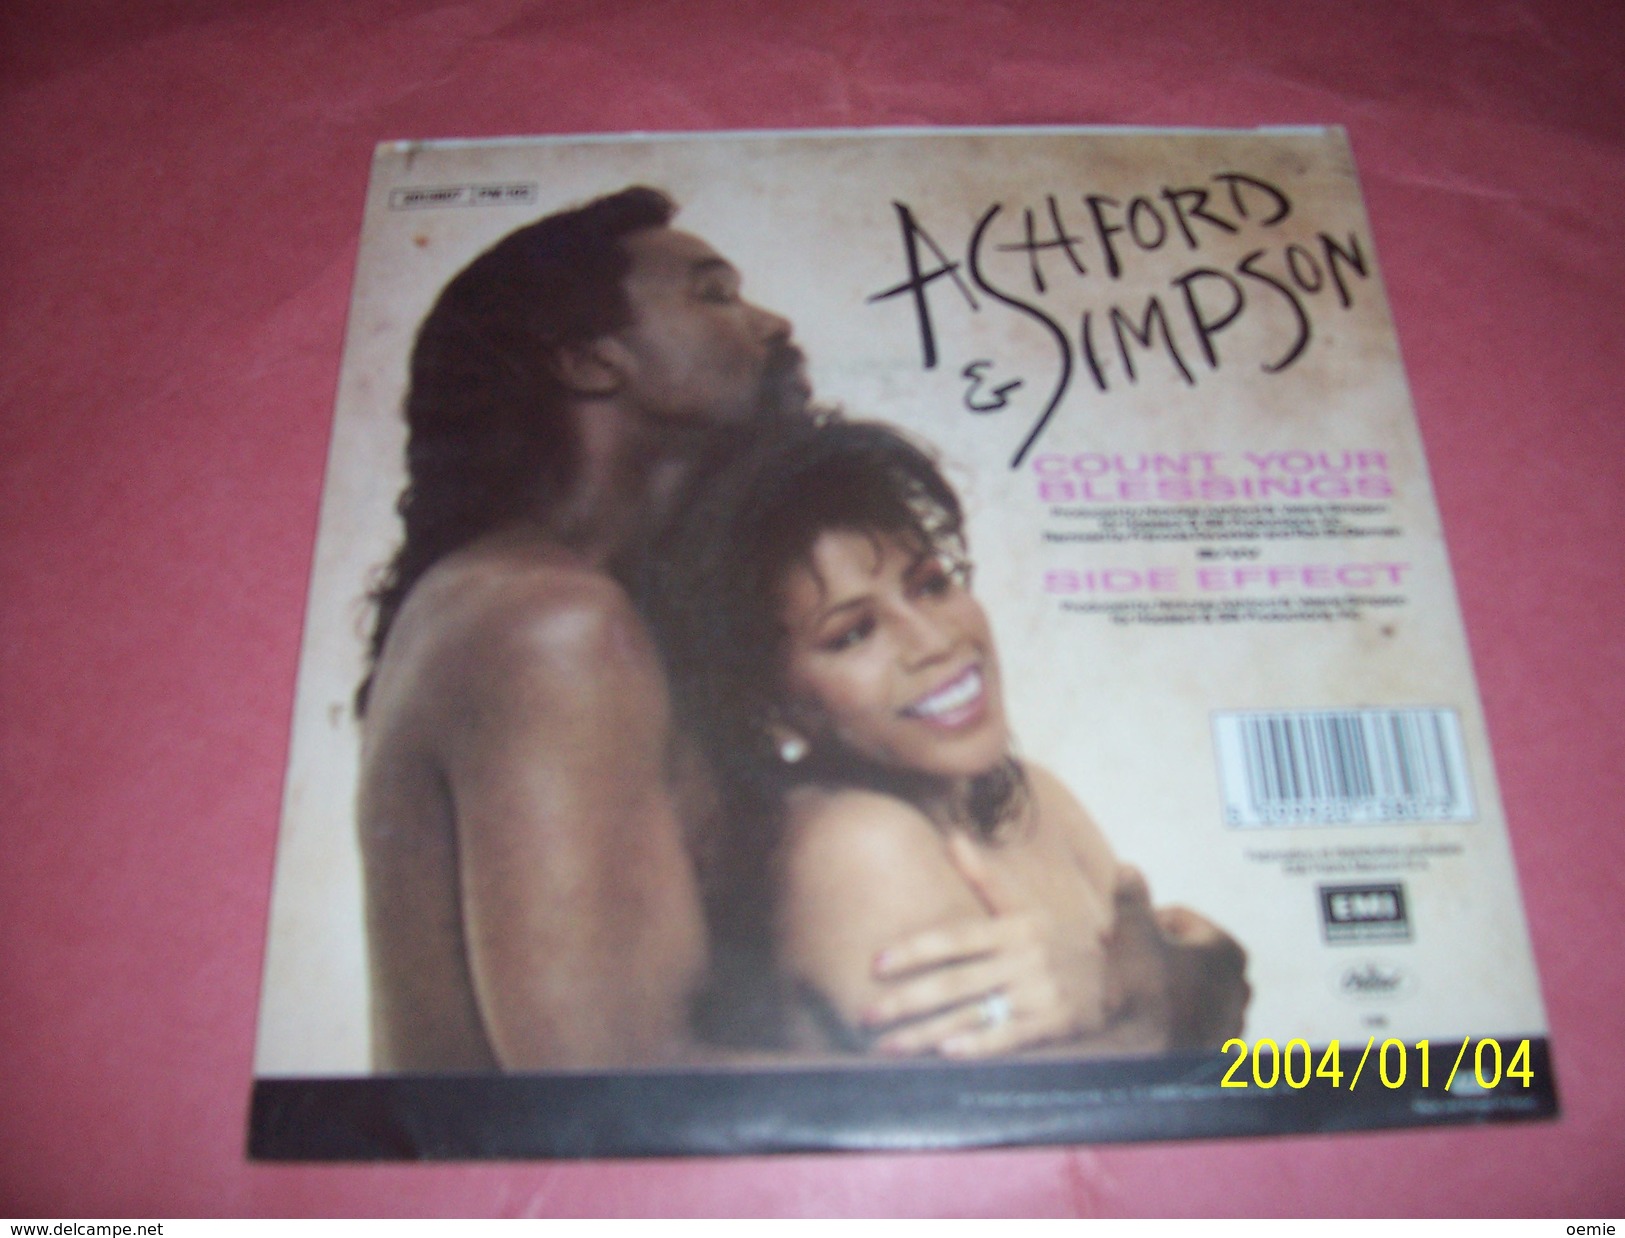 ASHFORD  &  SIMPSON  °°  COUNT  YOUR BLESSINGS - Collections Complètes